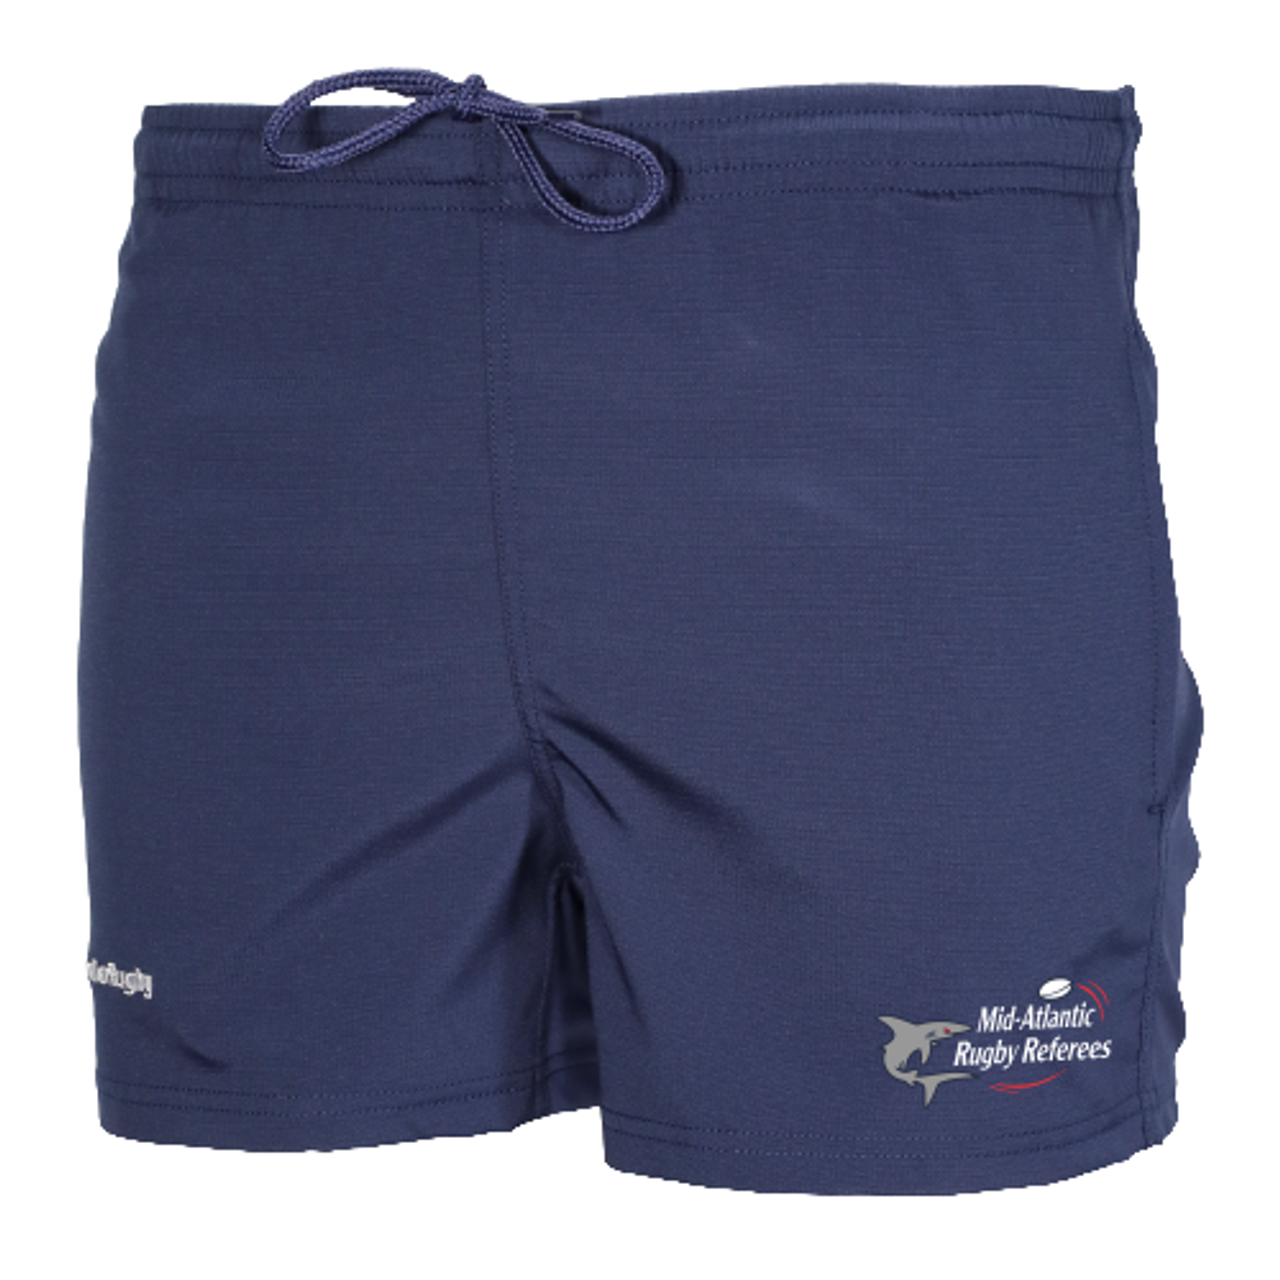 MARR Pocketed Performance Rugby Shorts, Navy